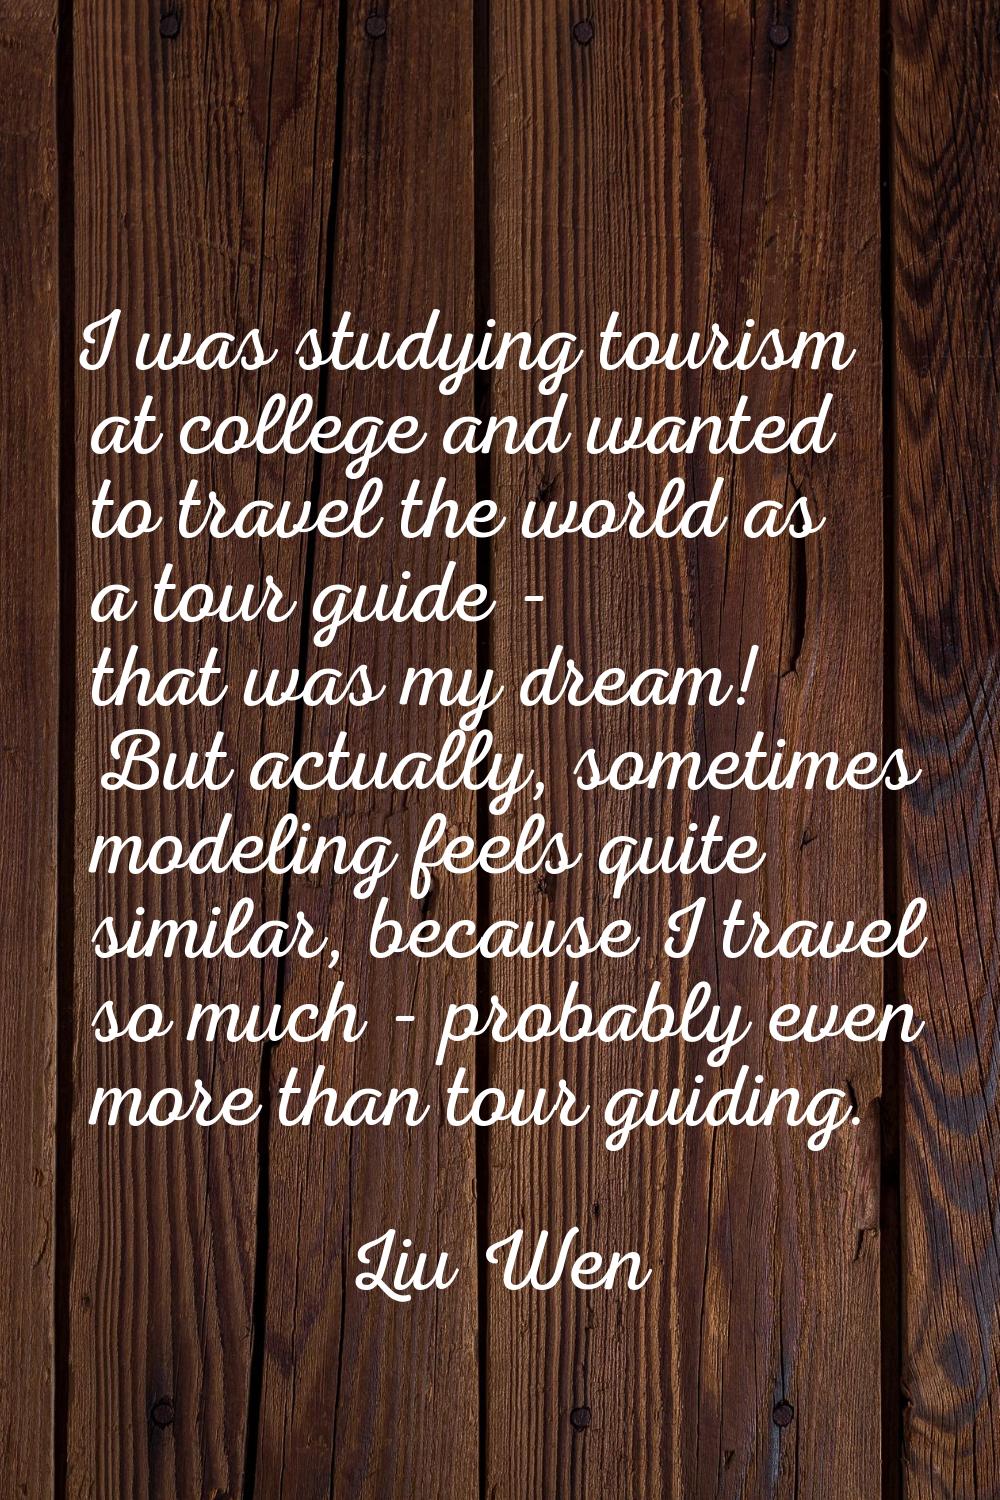 I was studying tourism at college and wanted to travel the world as a tour guide - that was my drea